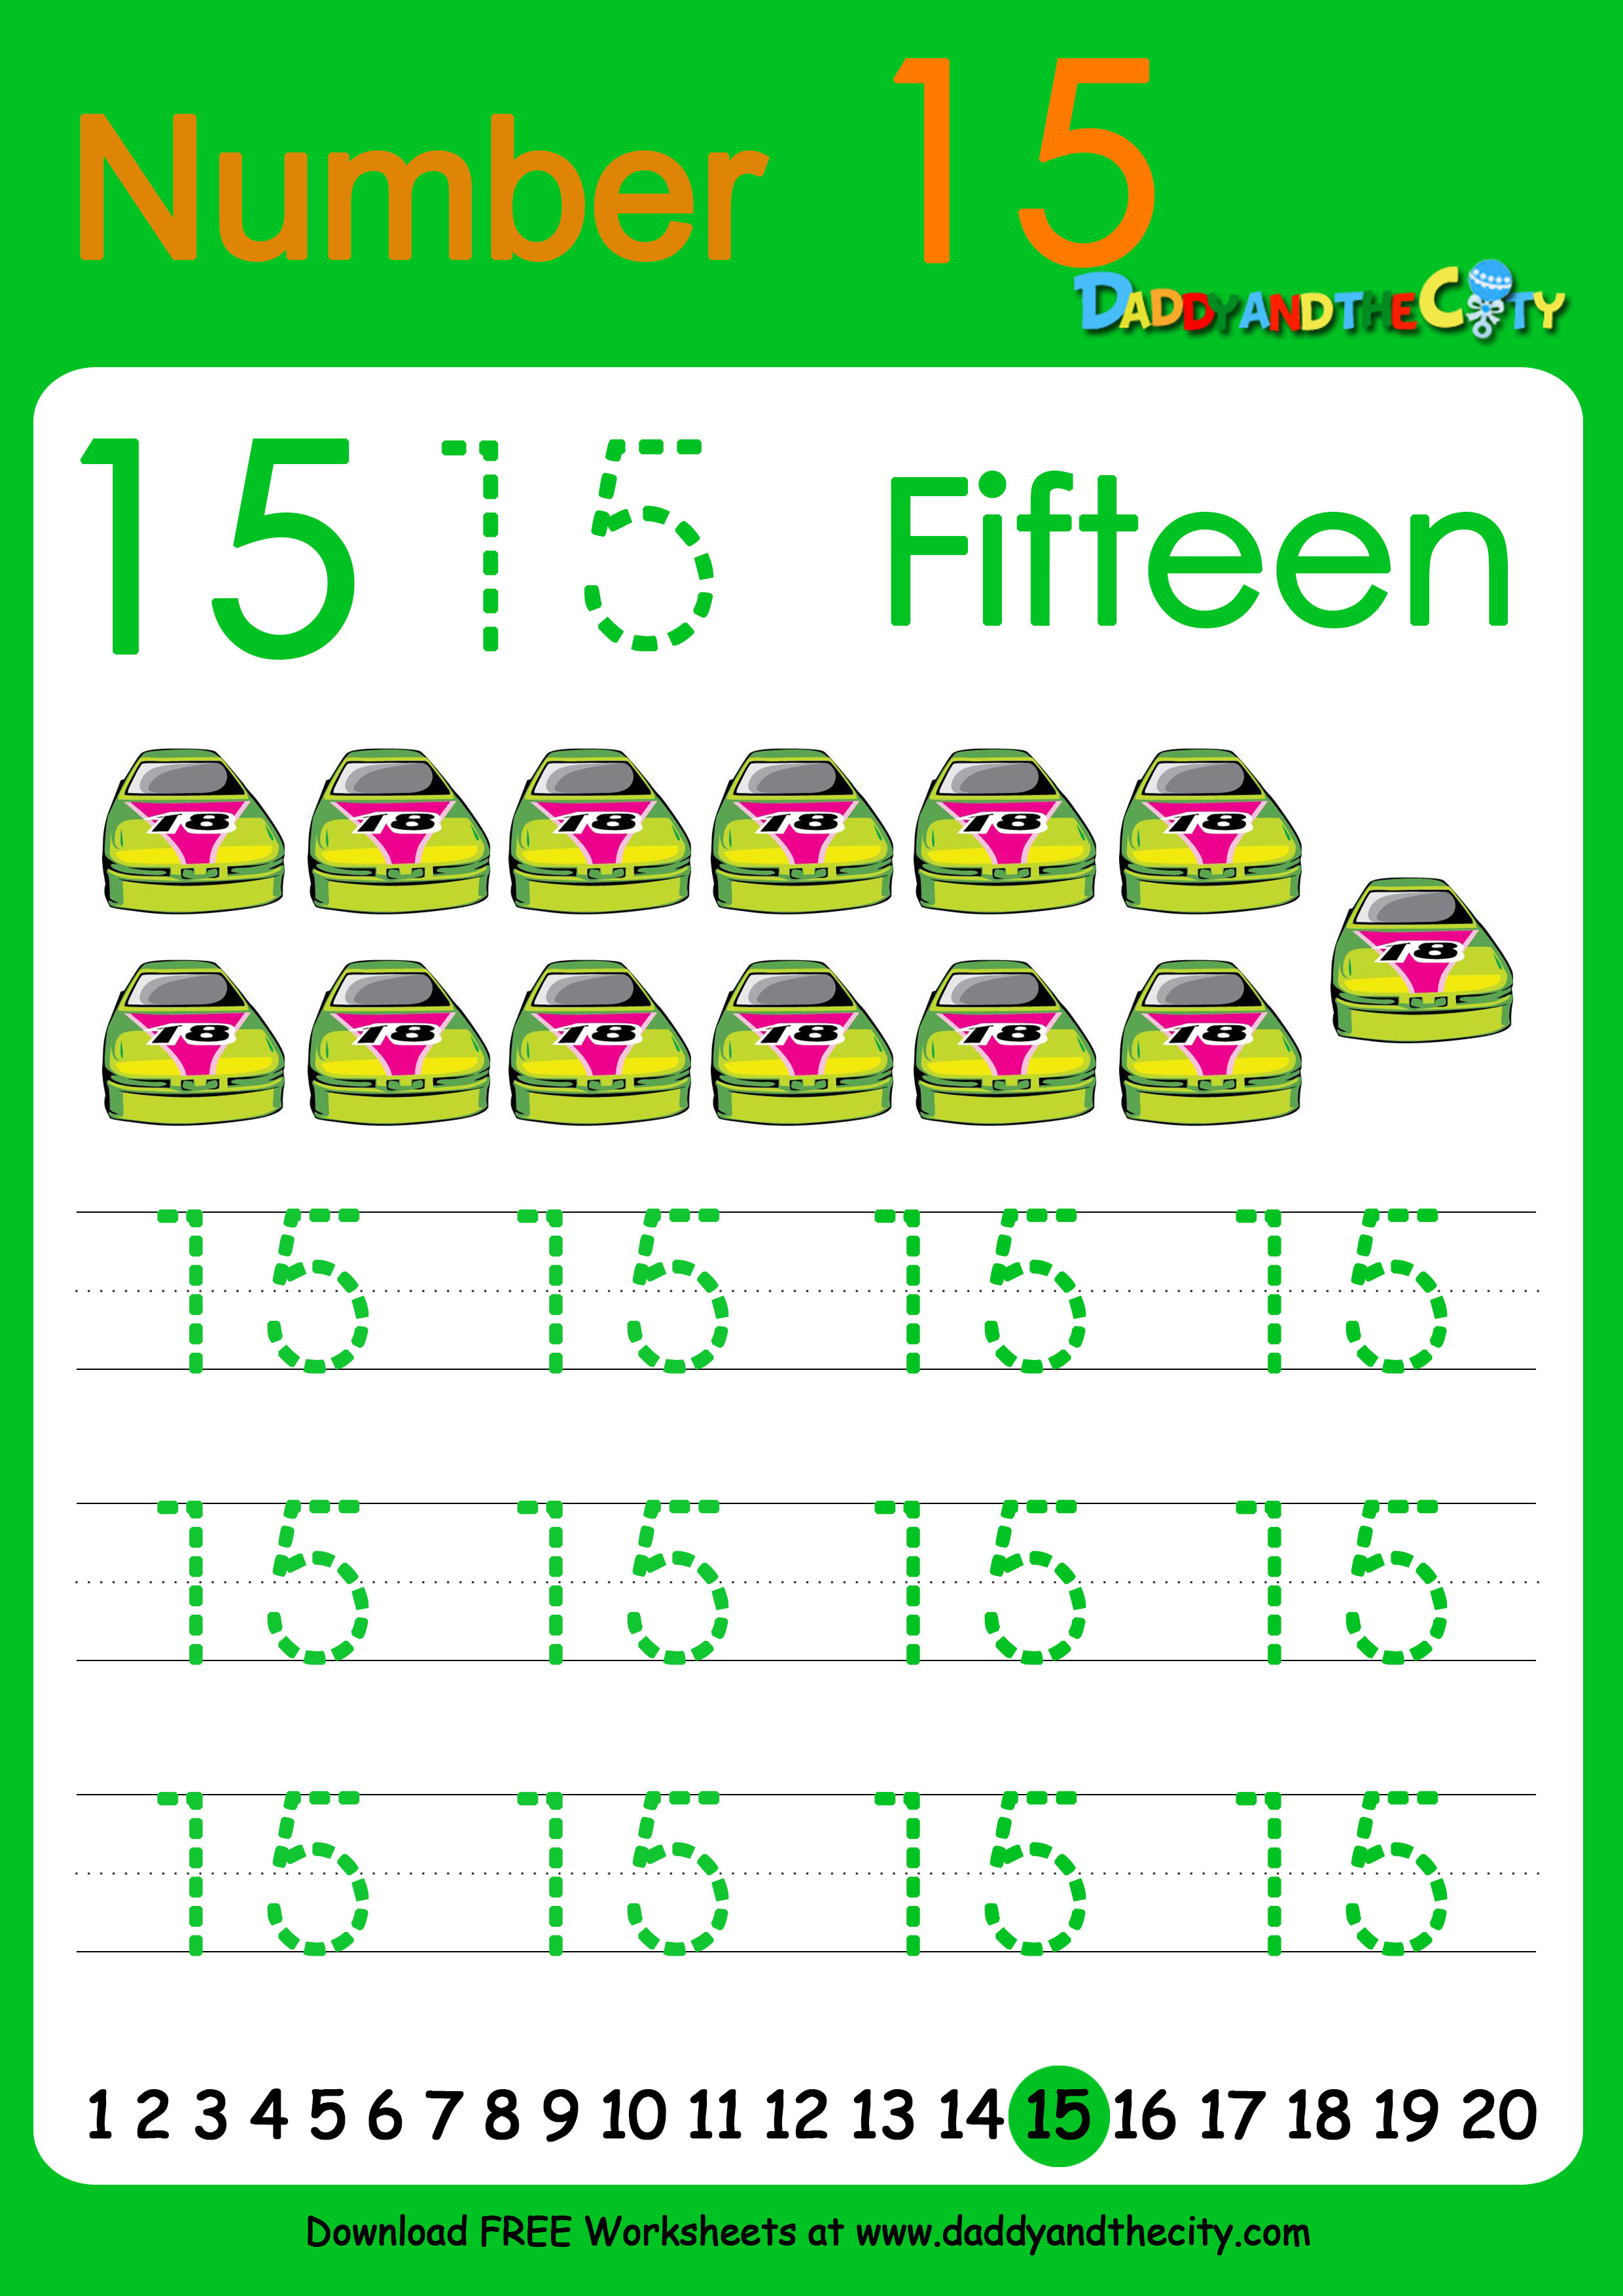 numbers-11-15-worksheets-free-download-gambr-co